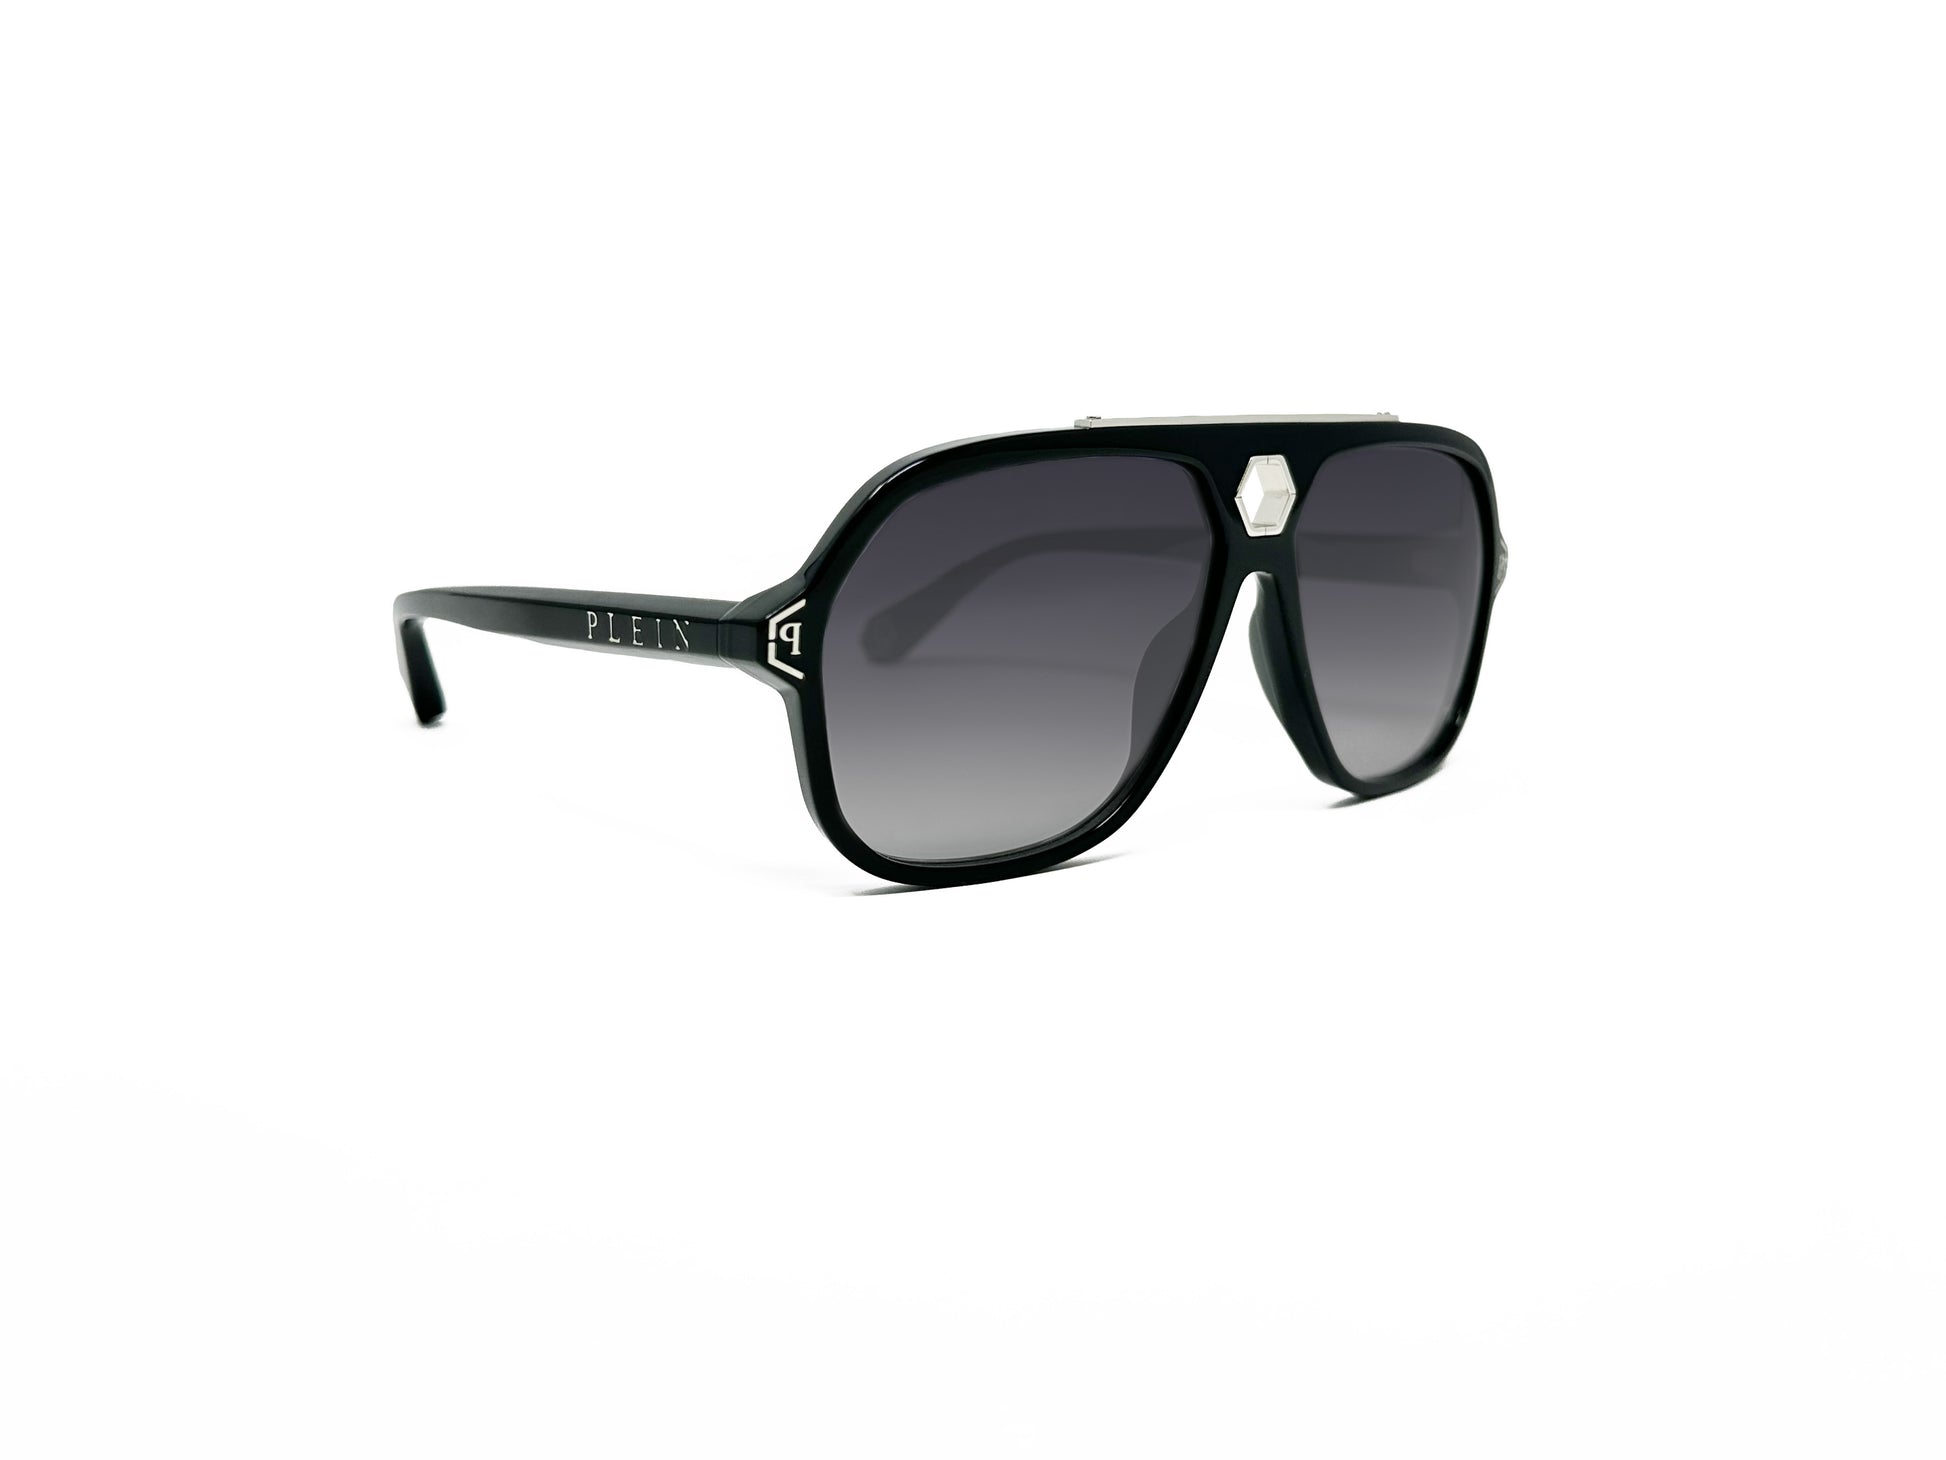 Philipp Plein large, acetate, squared-aviator style sunglass with octagonal cut-out above bridge. Model: Urban Vegas. Color: 0700 - Black. Side view.